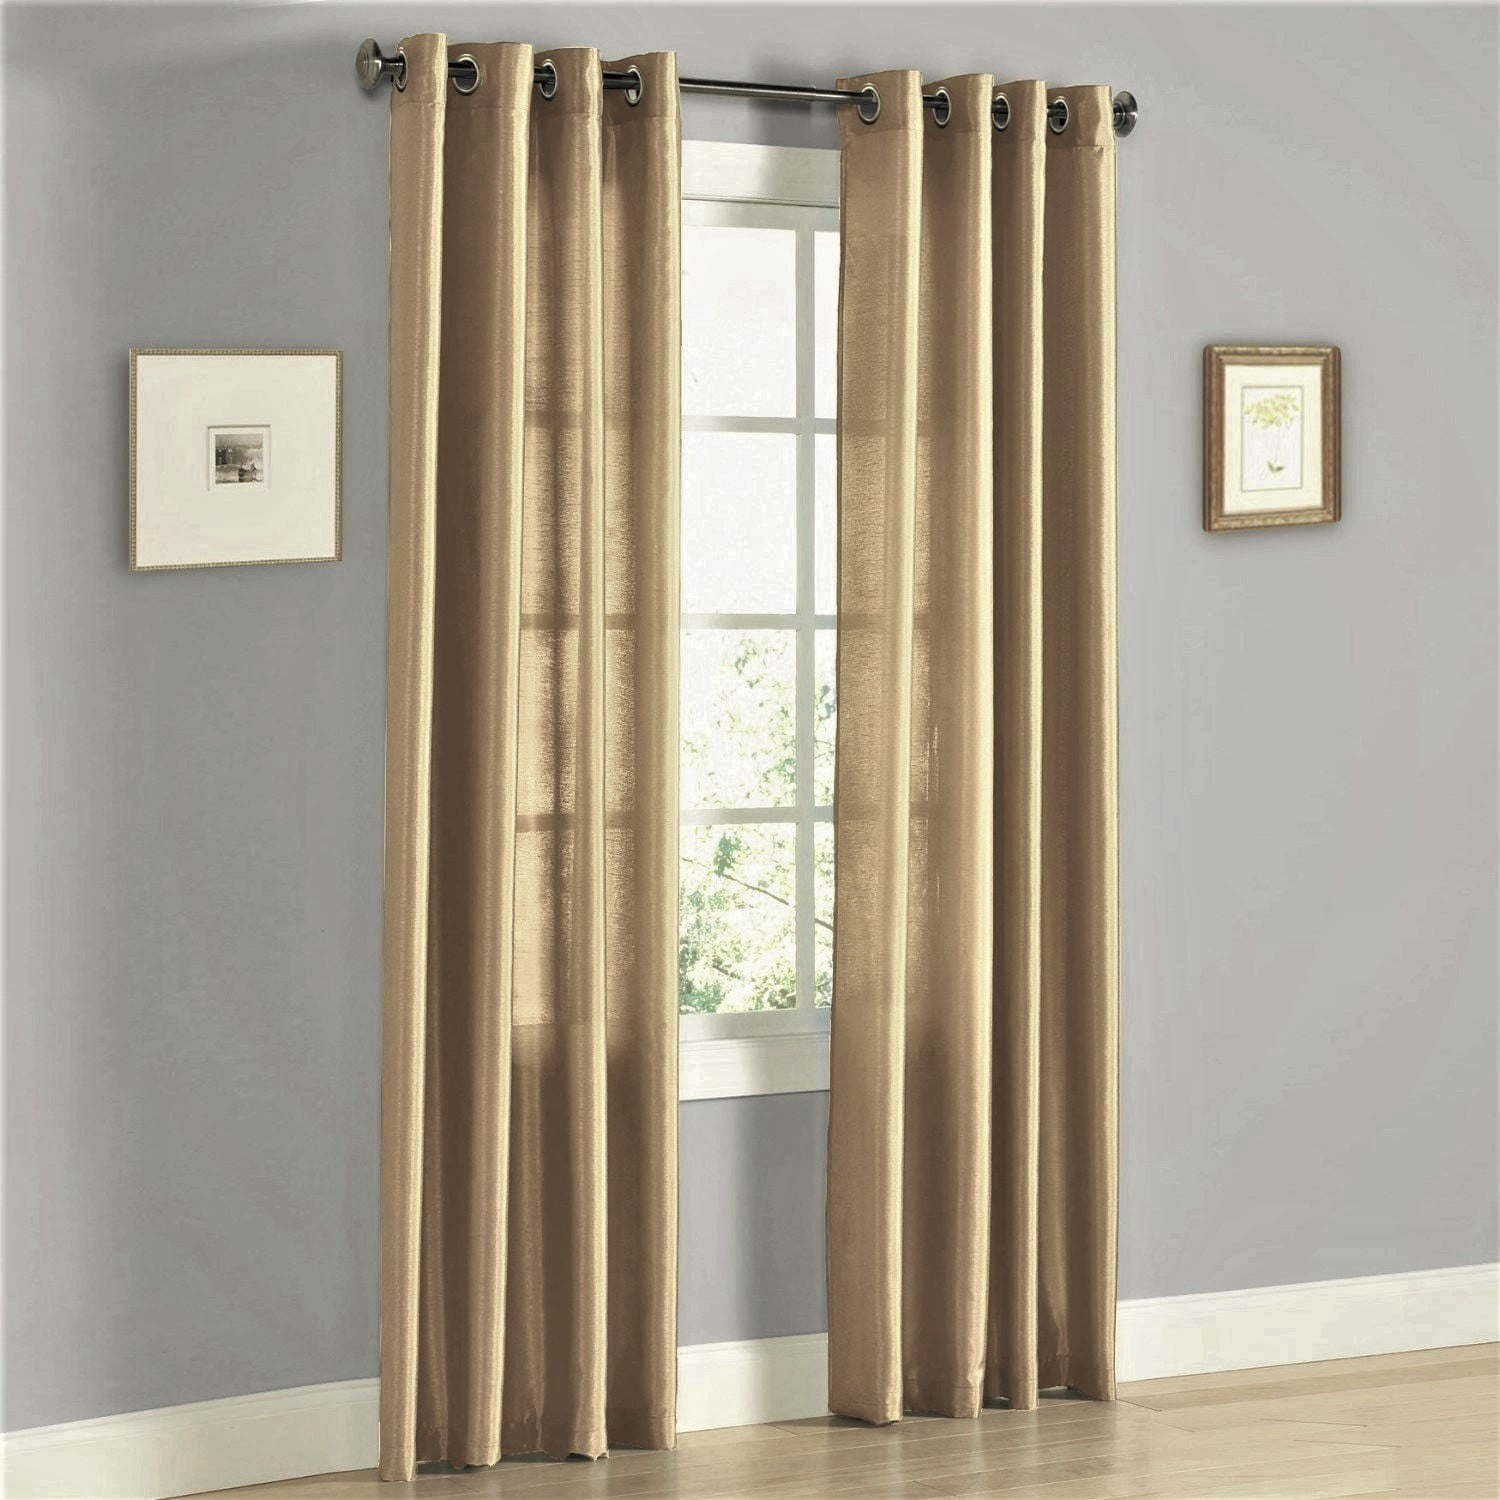 1 SILKY 2 TONE SOLID GROMMET FAUX SILK WINDOW CURTAIN PANEL HEIDI IVORY TAUPE 